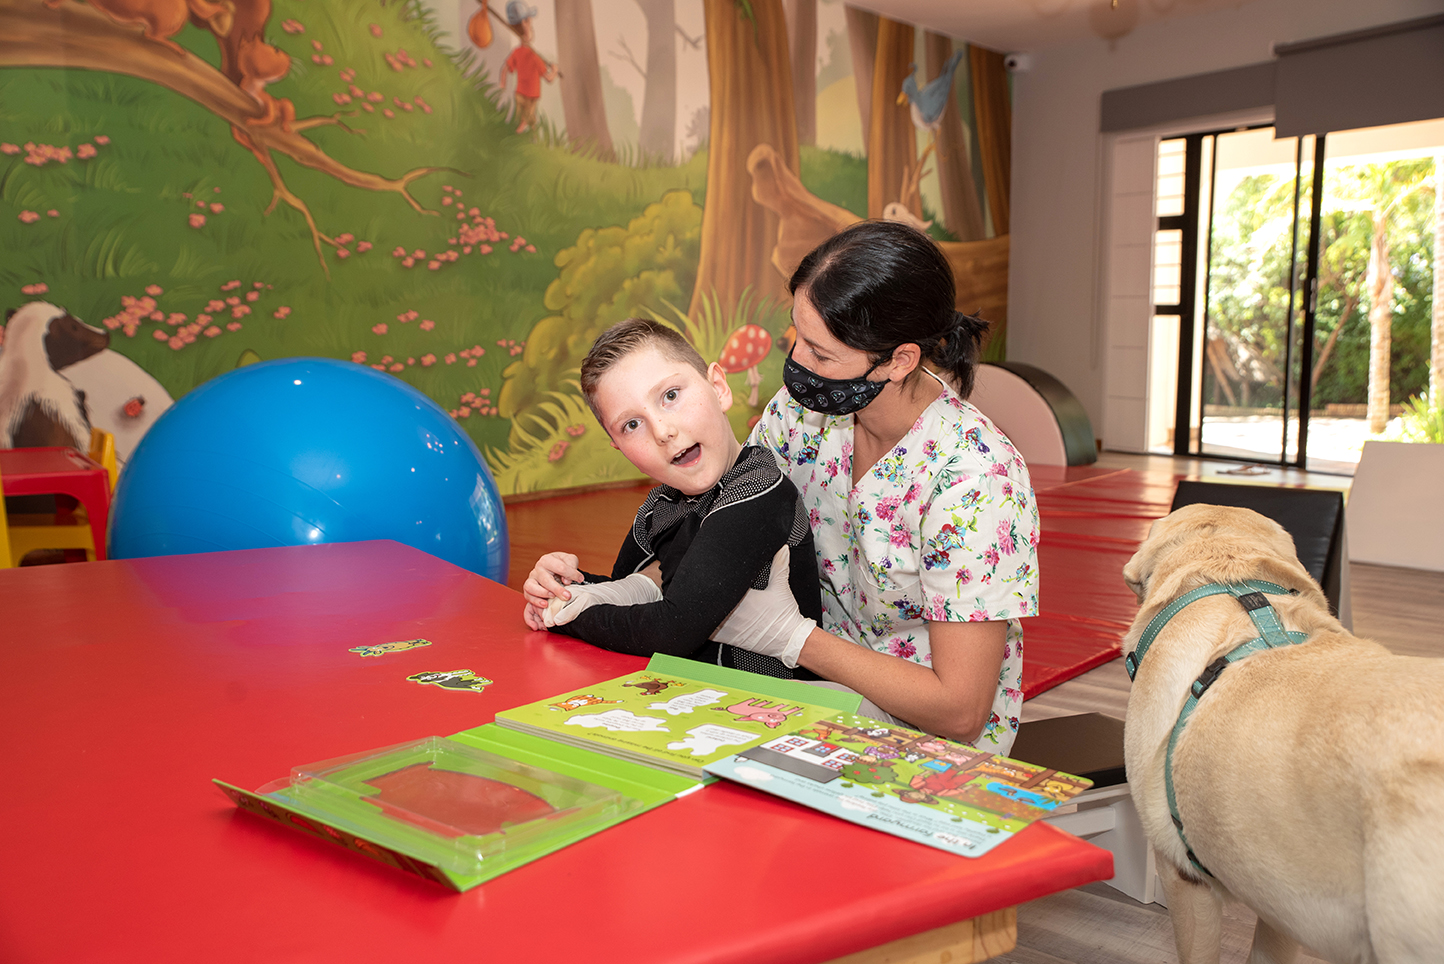 Our soft play area is a great environment for play and learning